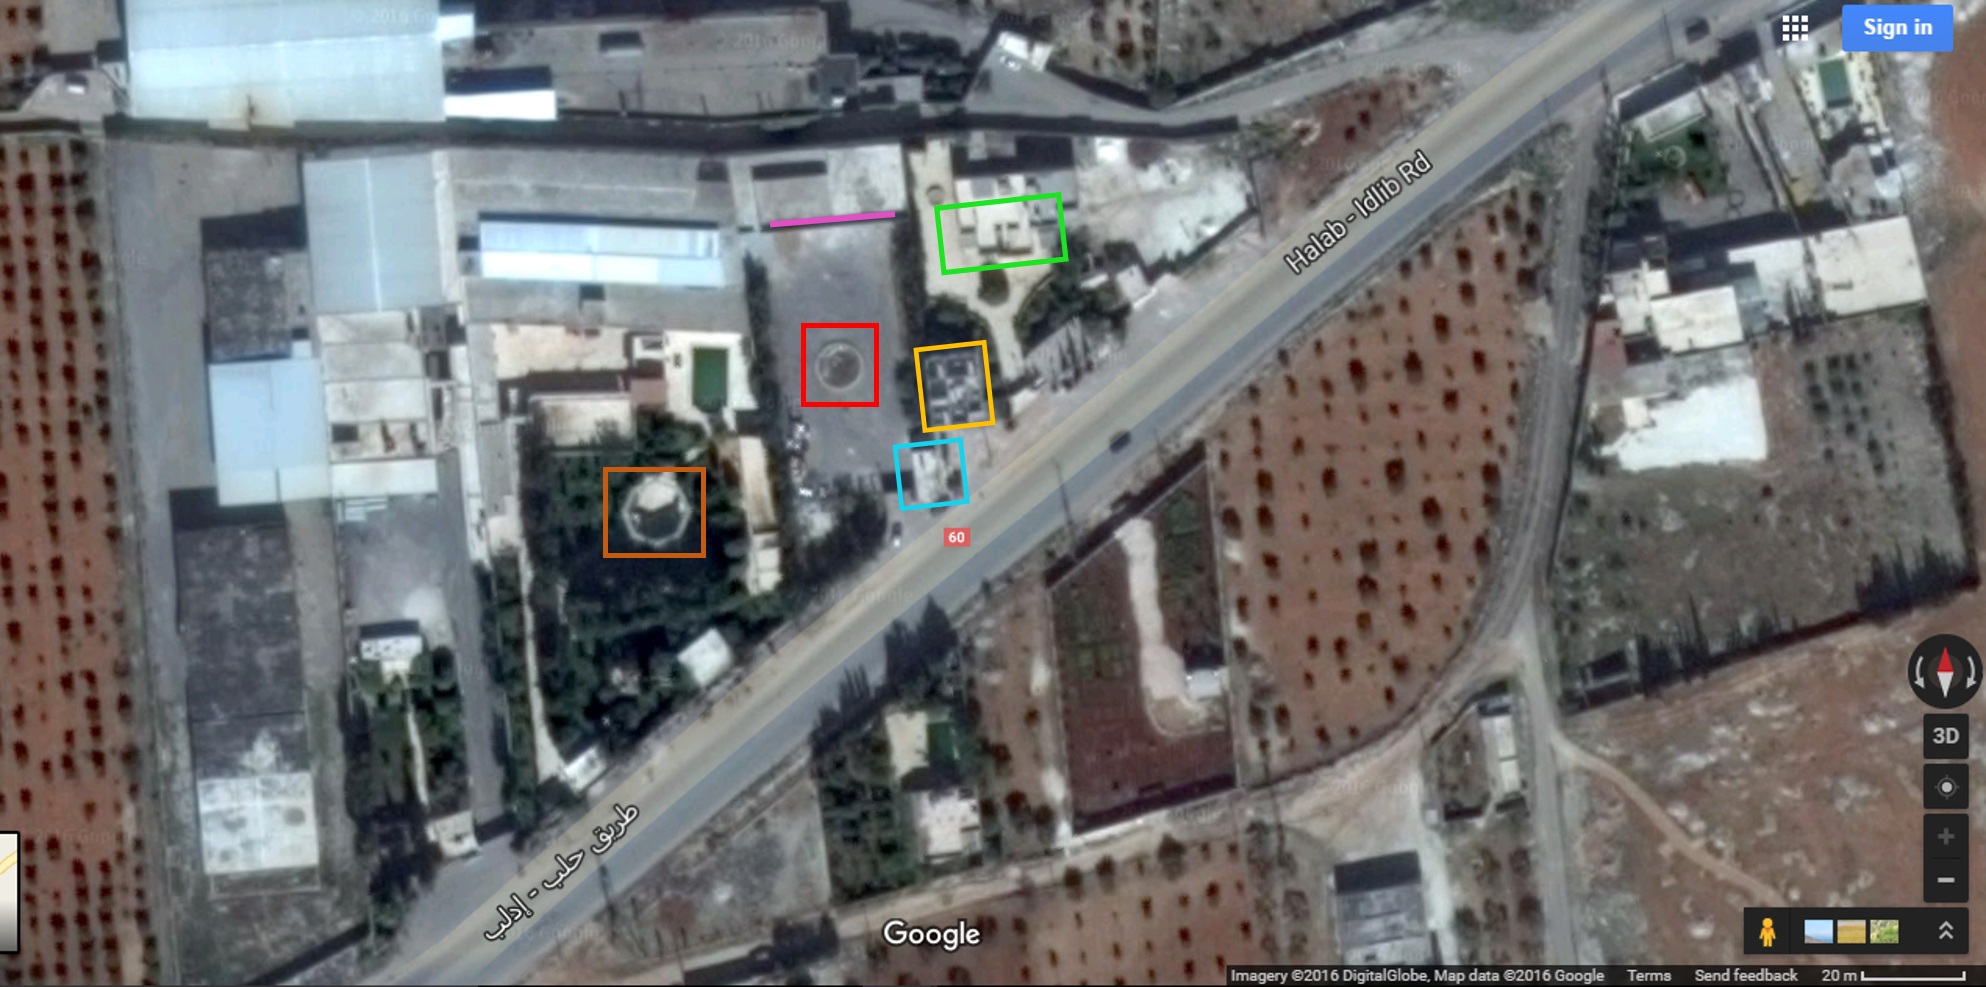 Fig 2 - Close up of warehouse complex - Highway 60 runs from bottom left to top right